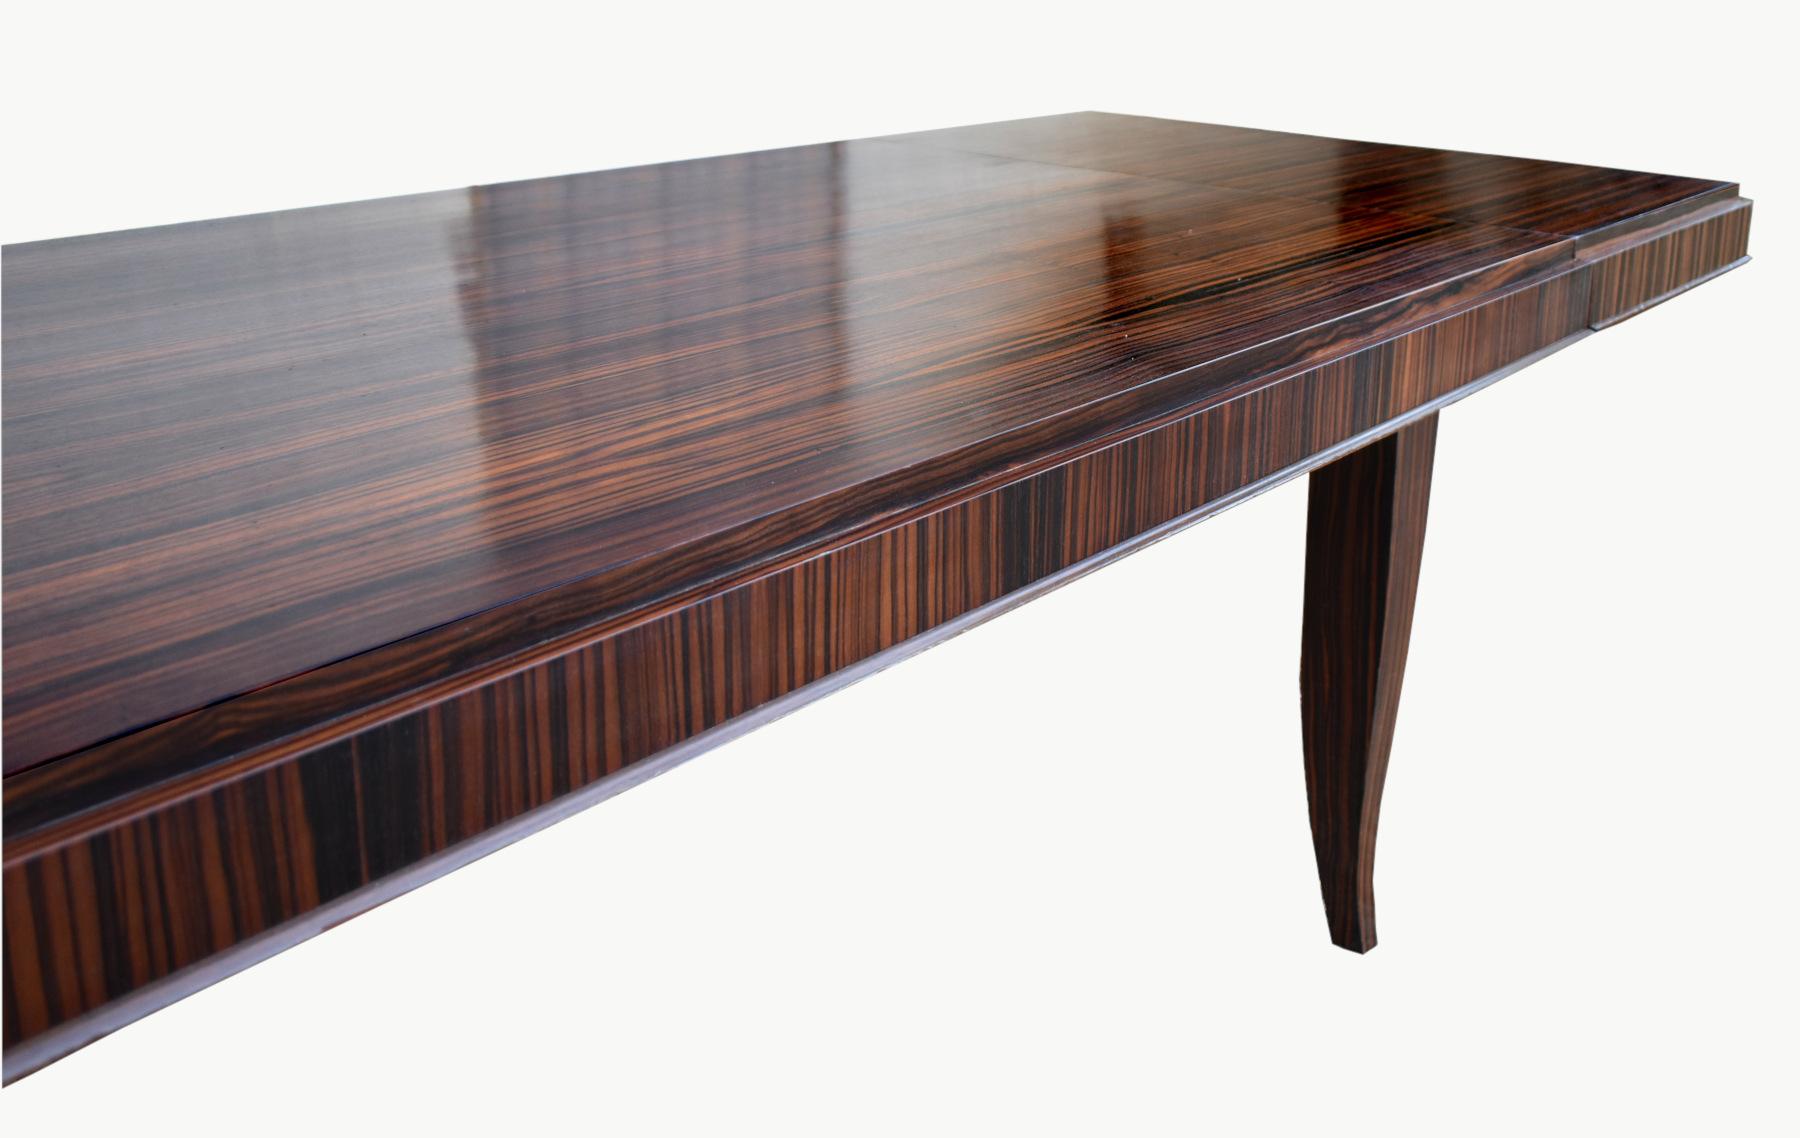 20th Century Impressive French Macassar Ebony Dining Table Art Deco Style For Sale